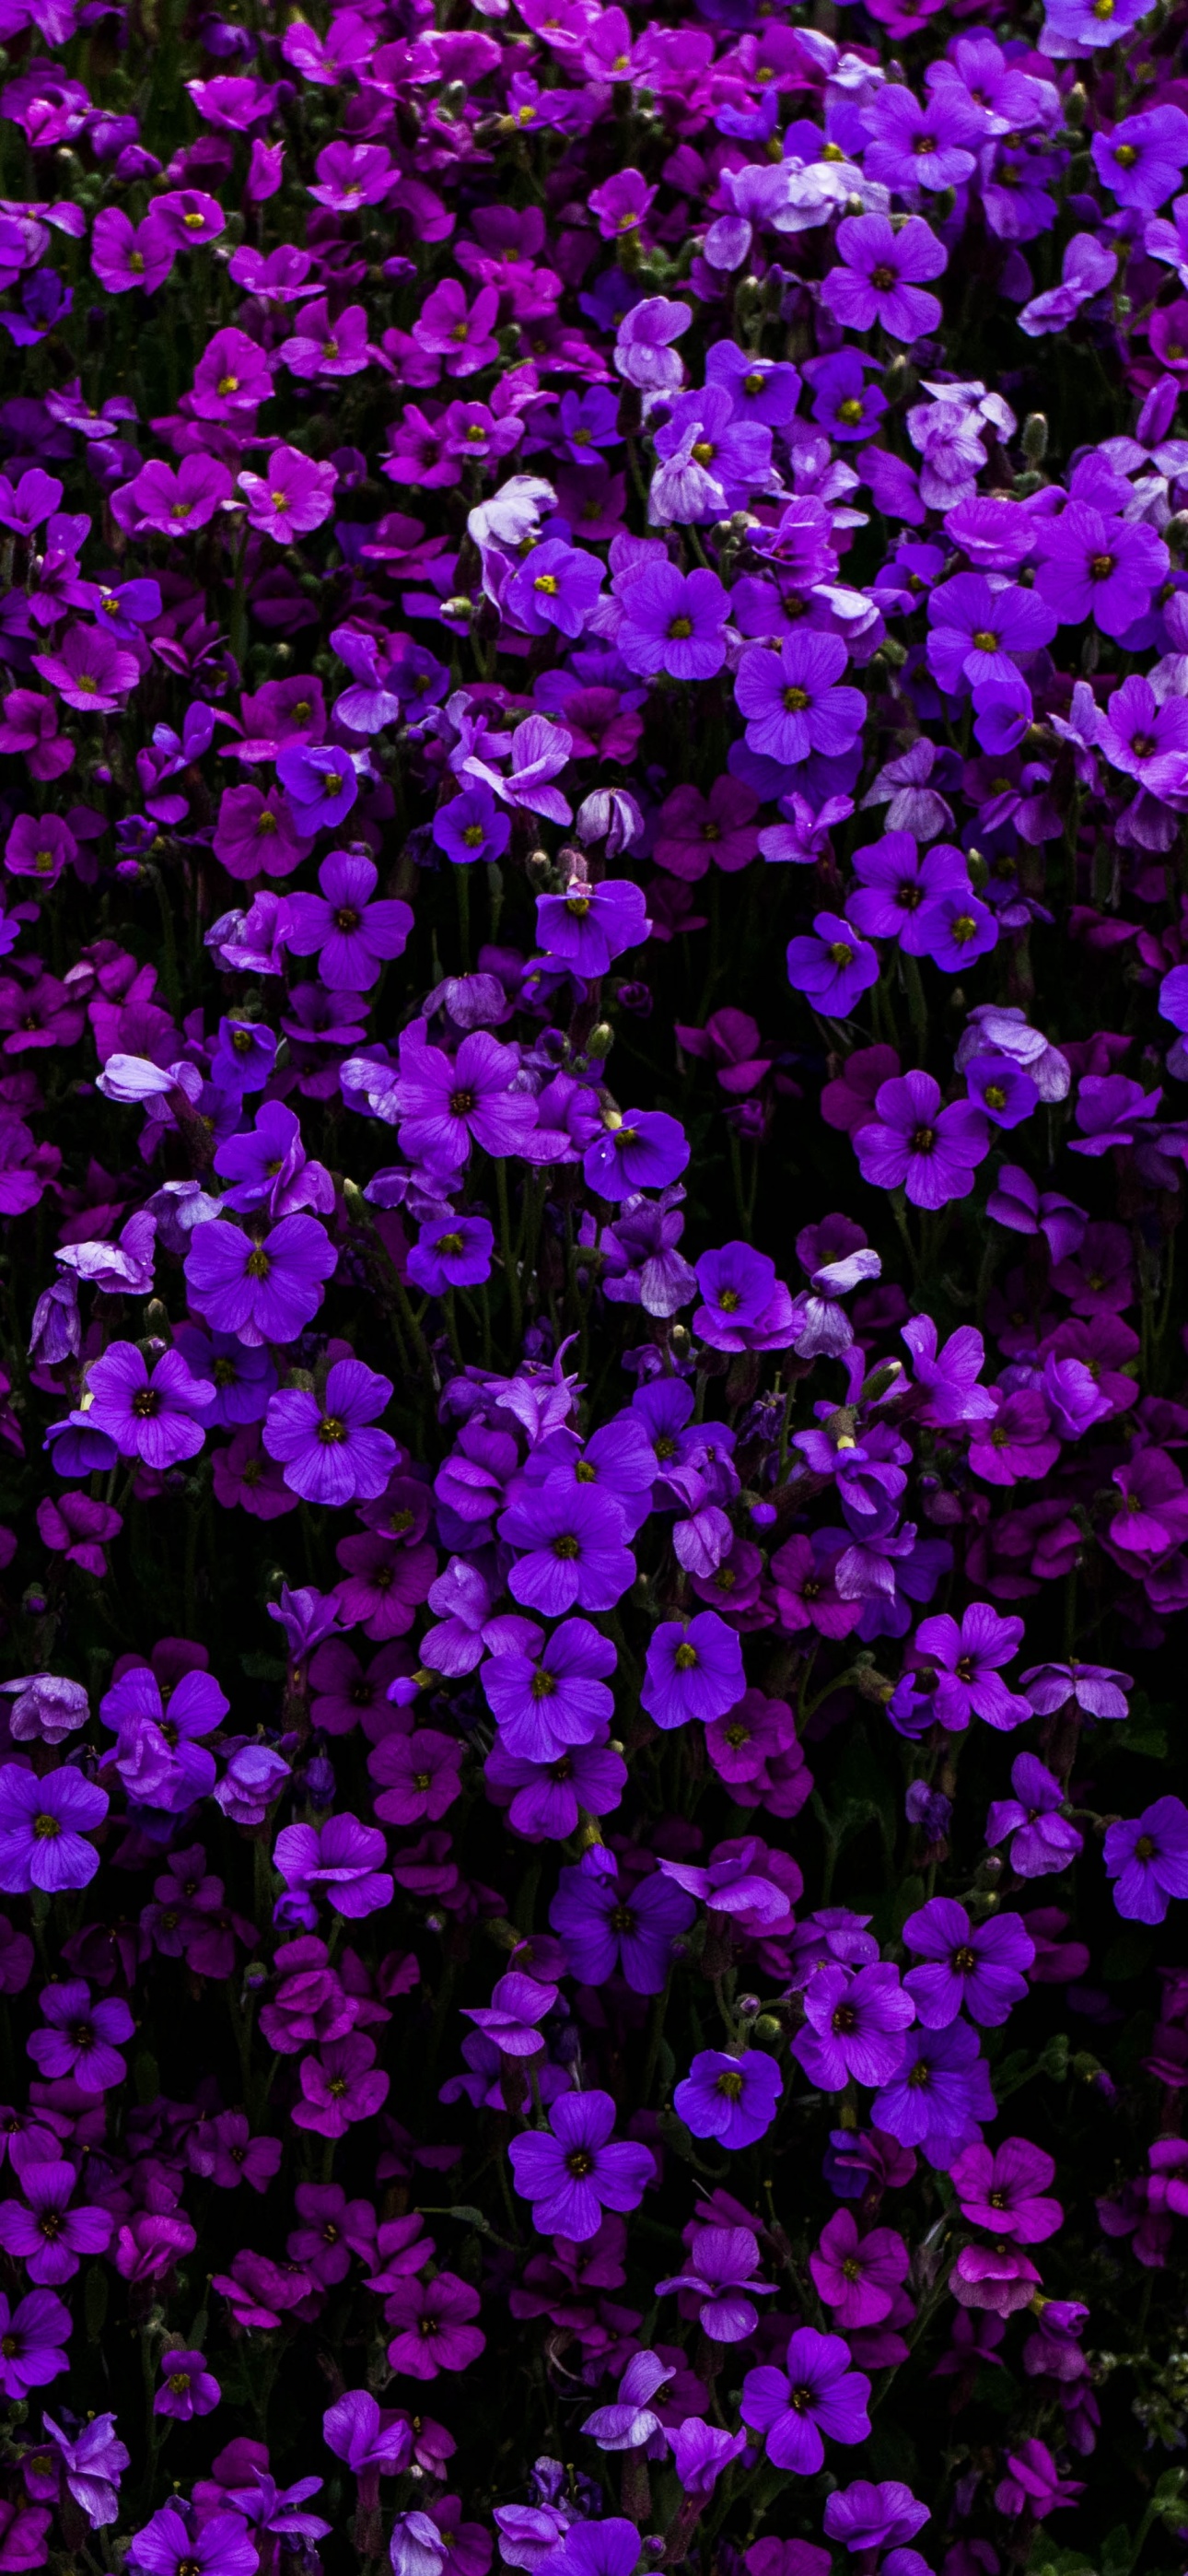 750 Purple Flower Pictures  Download Free Images on Unsplash